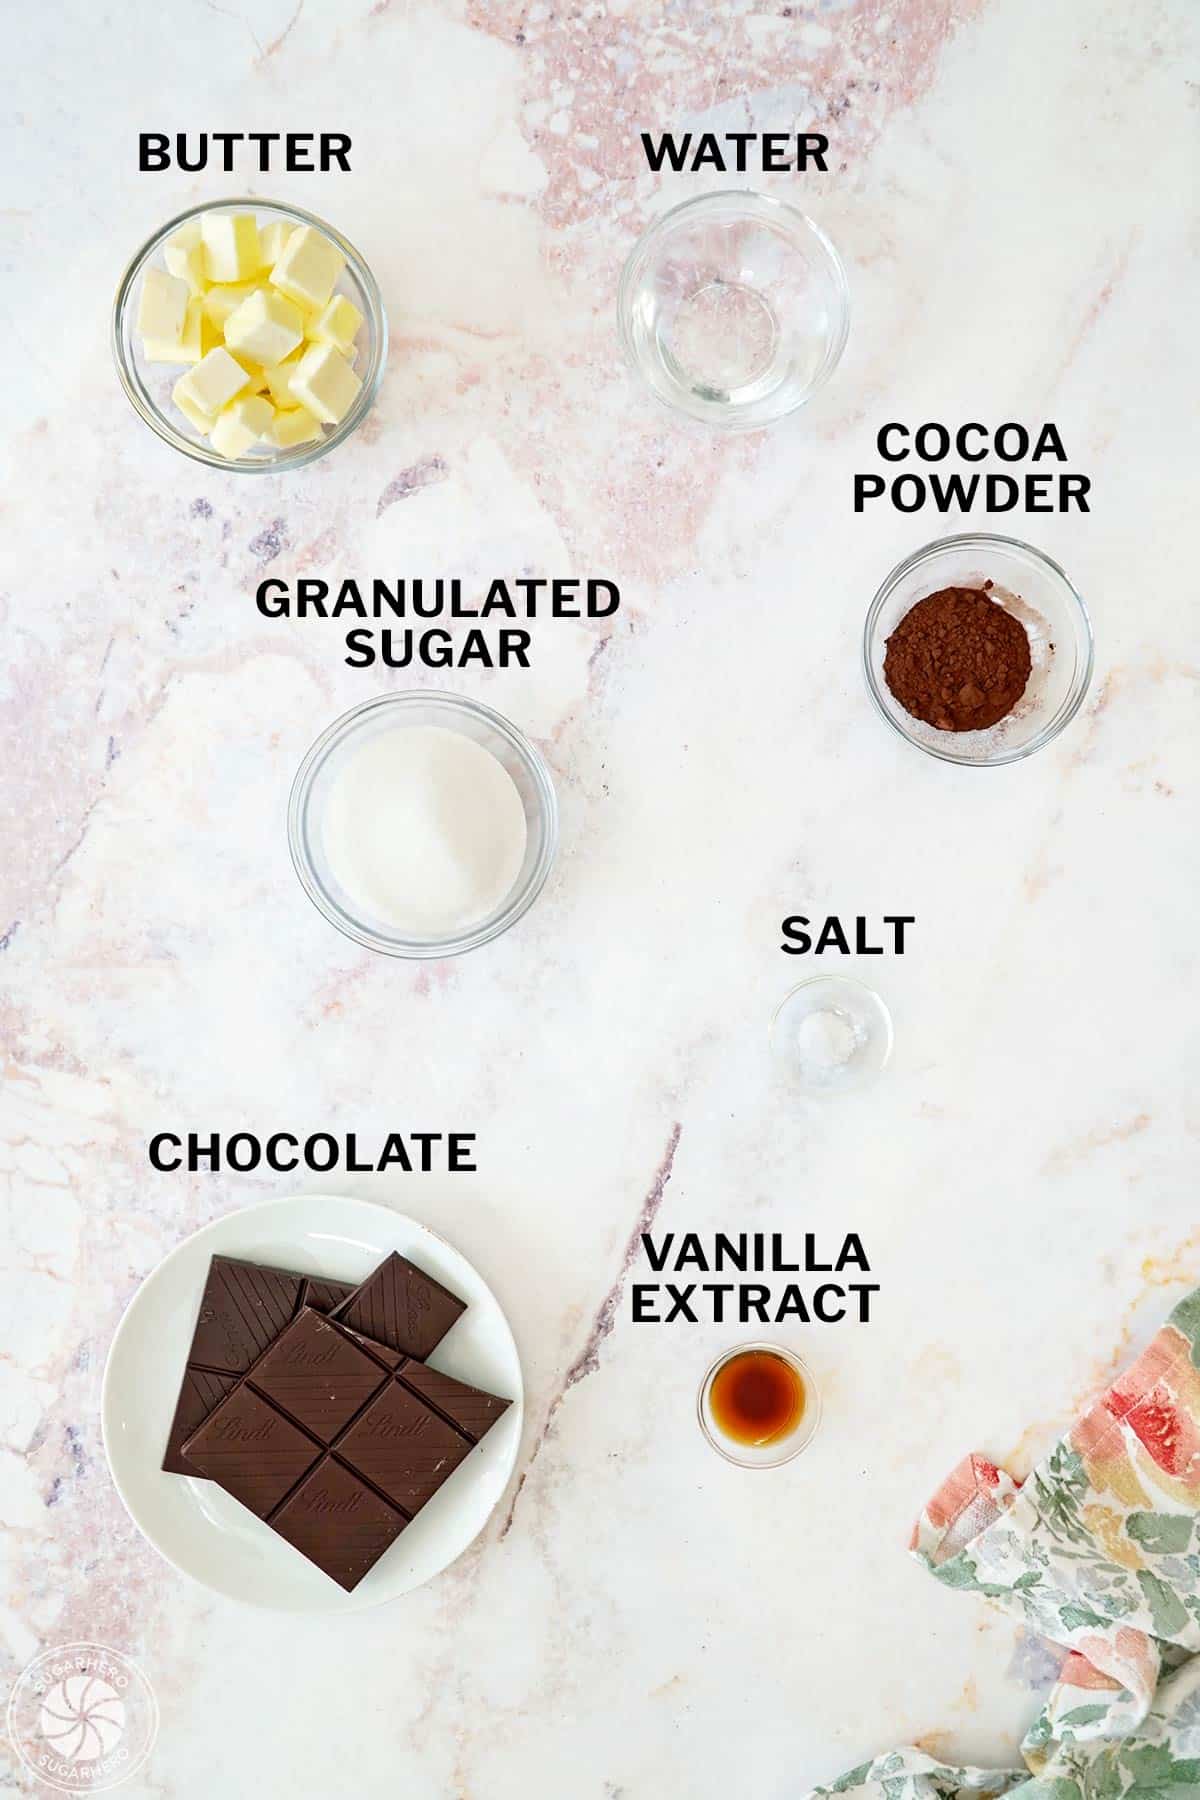 Ingredients needed to make Chocolate Spread with text labels.